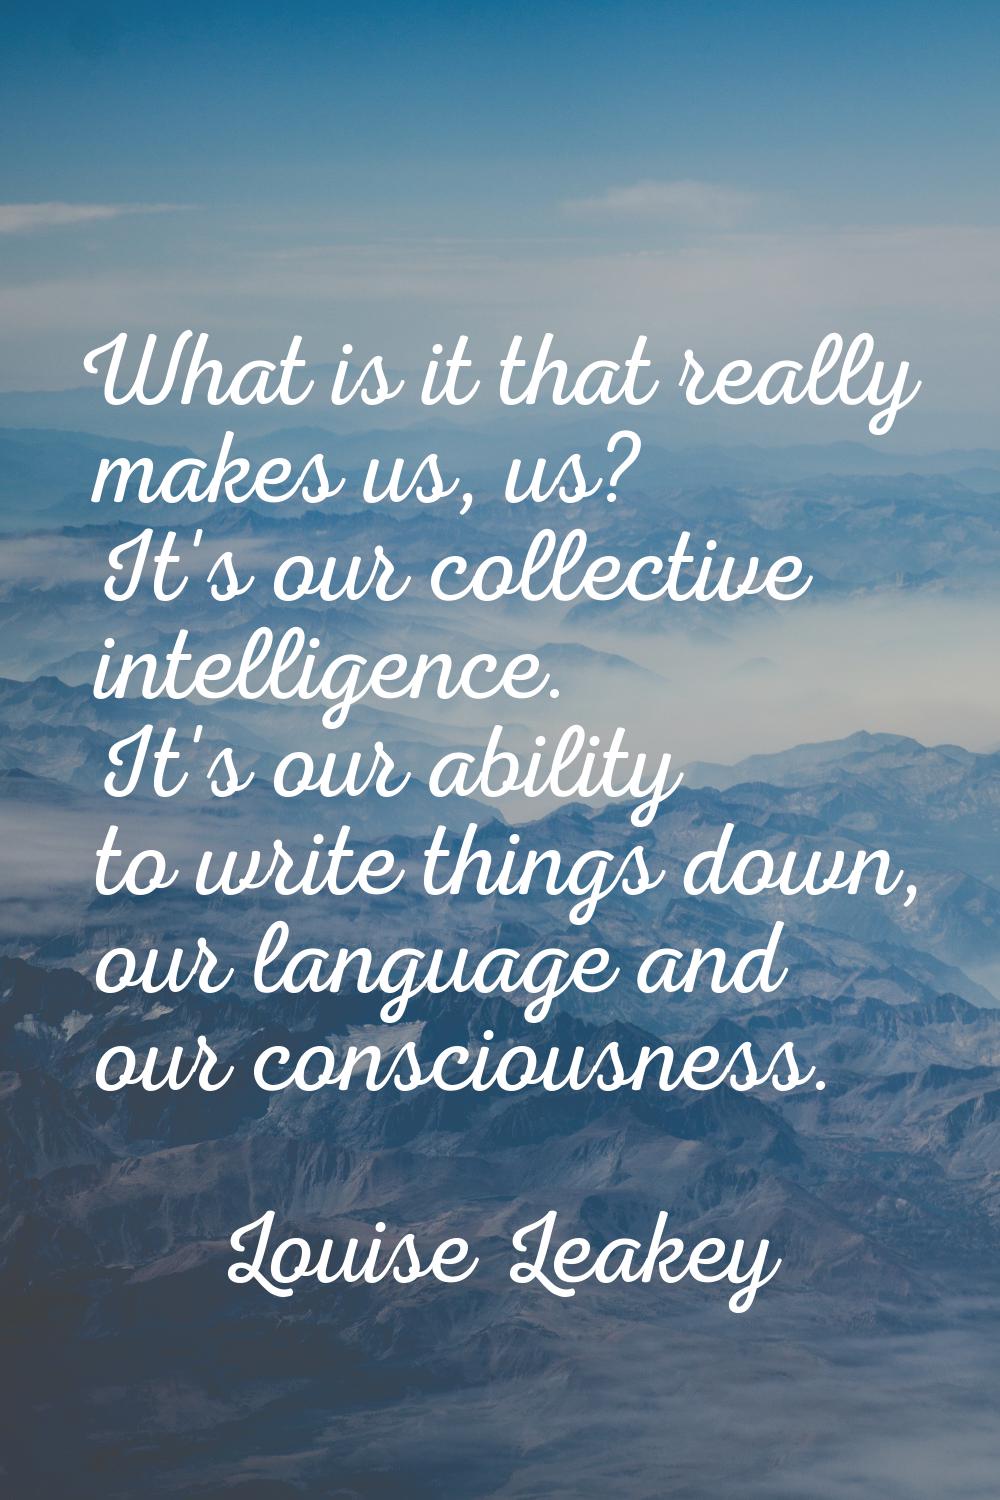 What is it that really makes us, us? It's our collective intelligence. It's our ability to write th